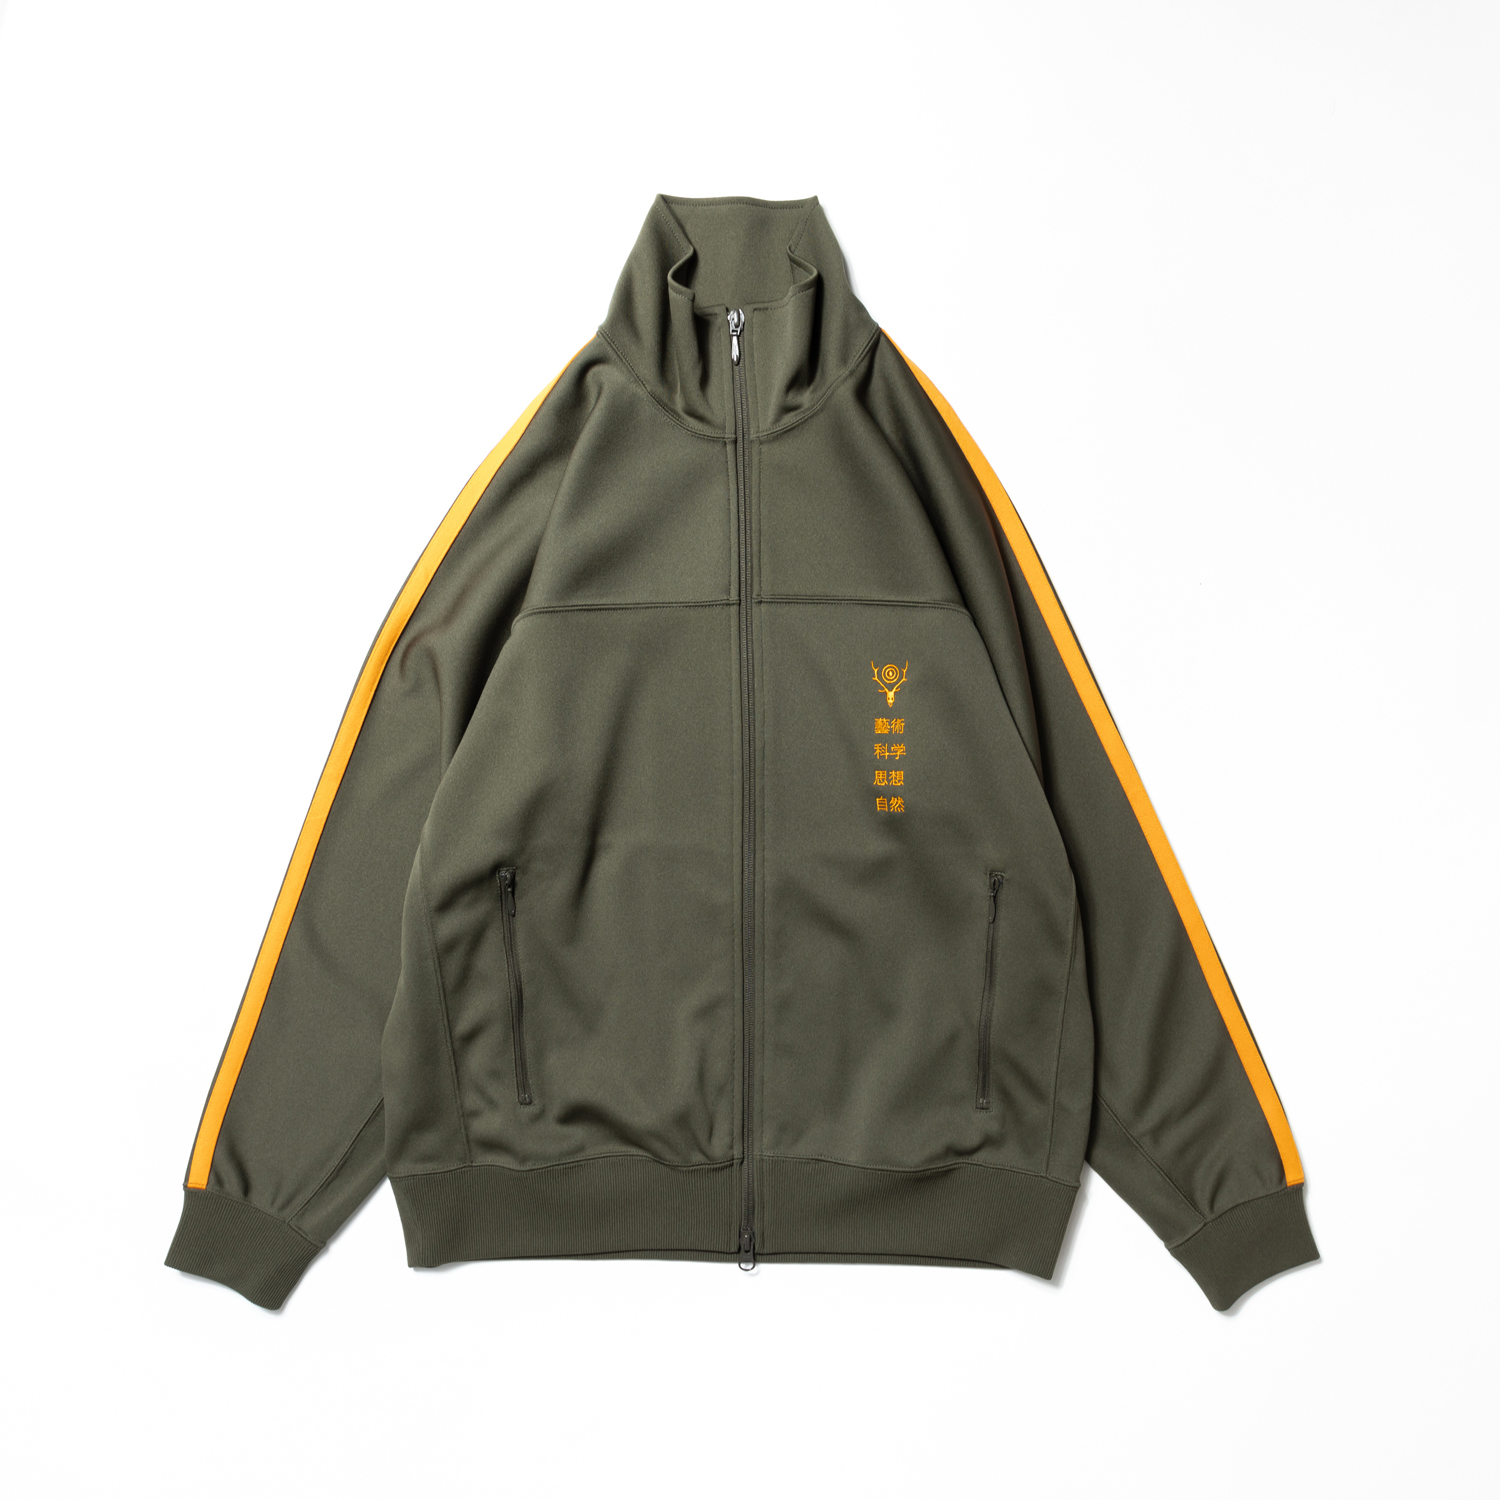 SOUTH2 WEST8 x TACOMA FUJI RECORDS Trainer Jacket – Poly Smooth